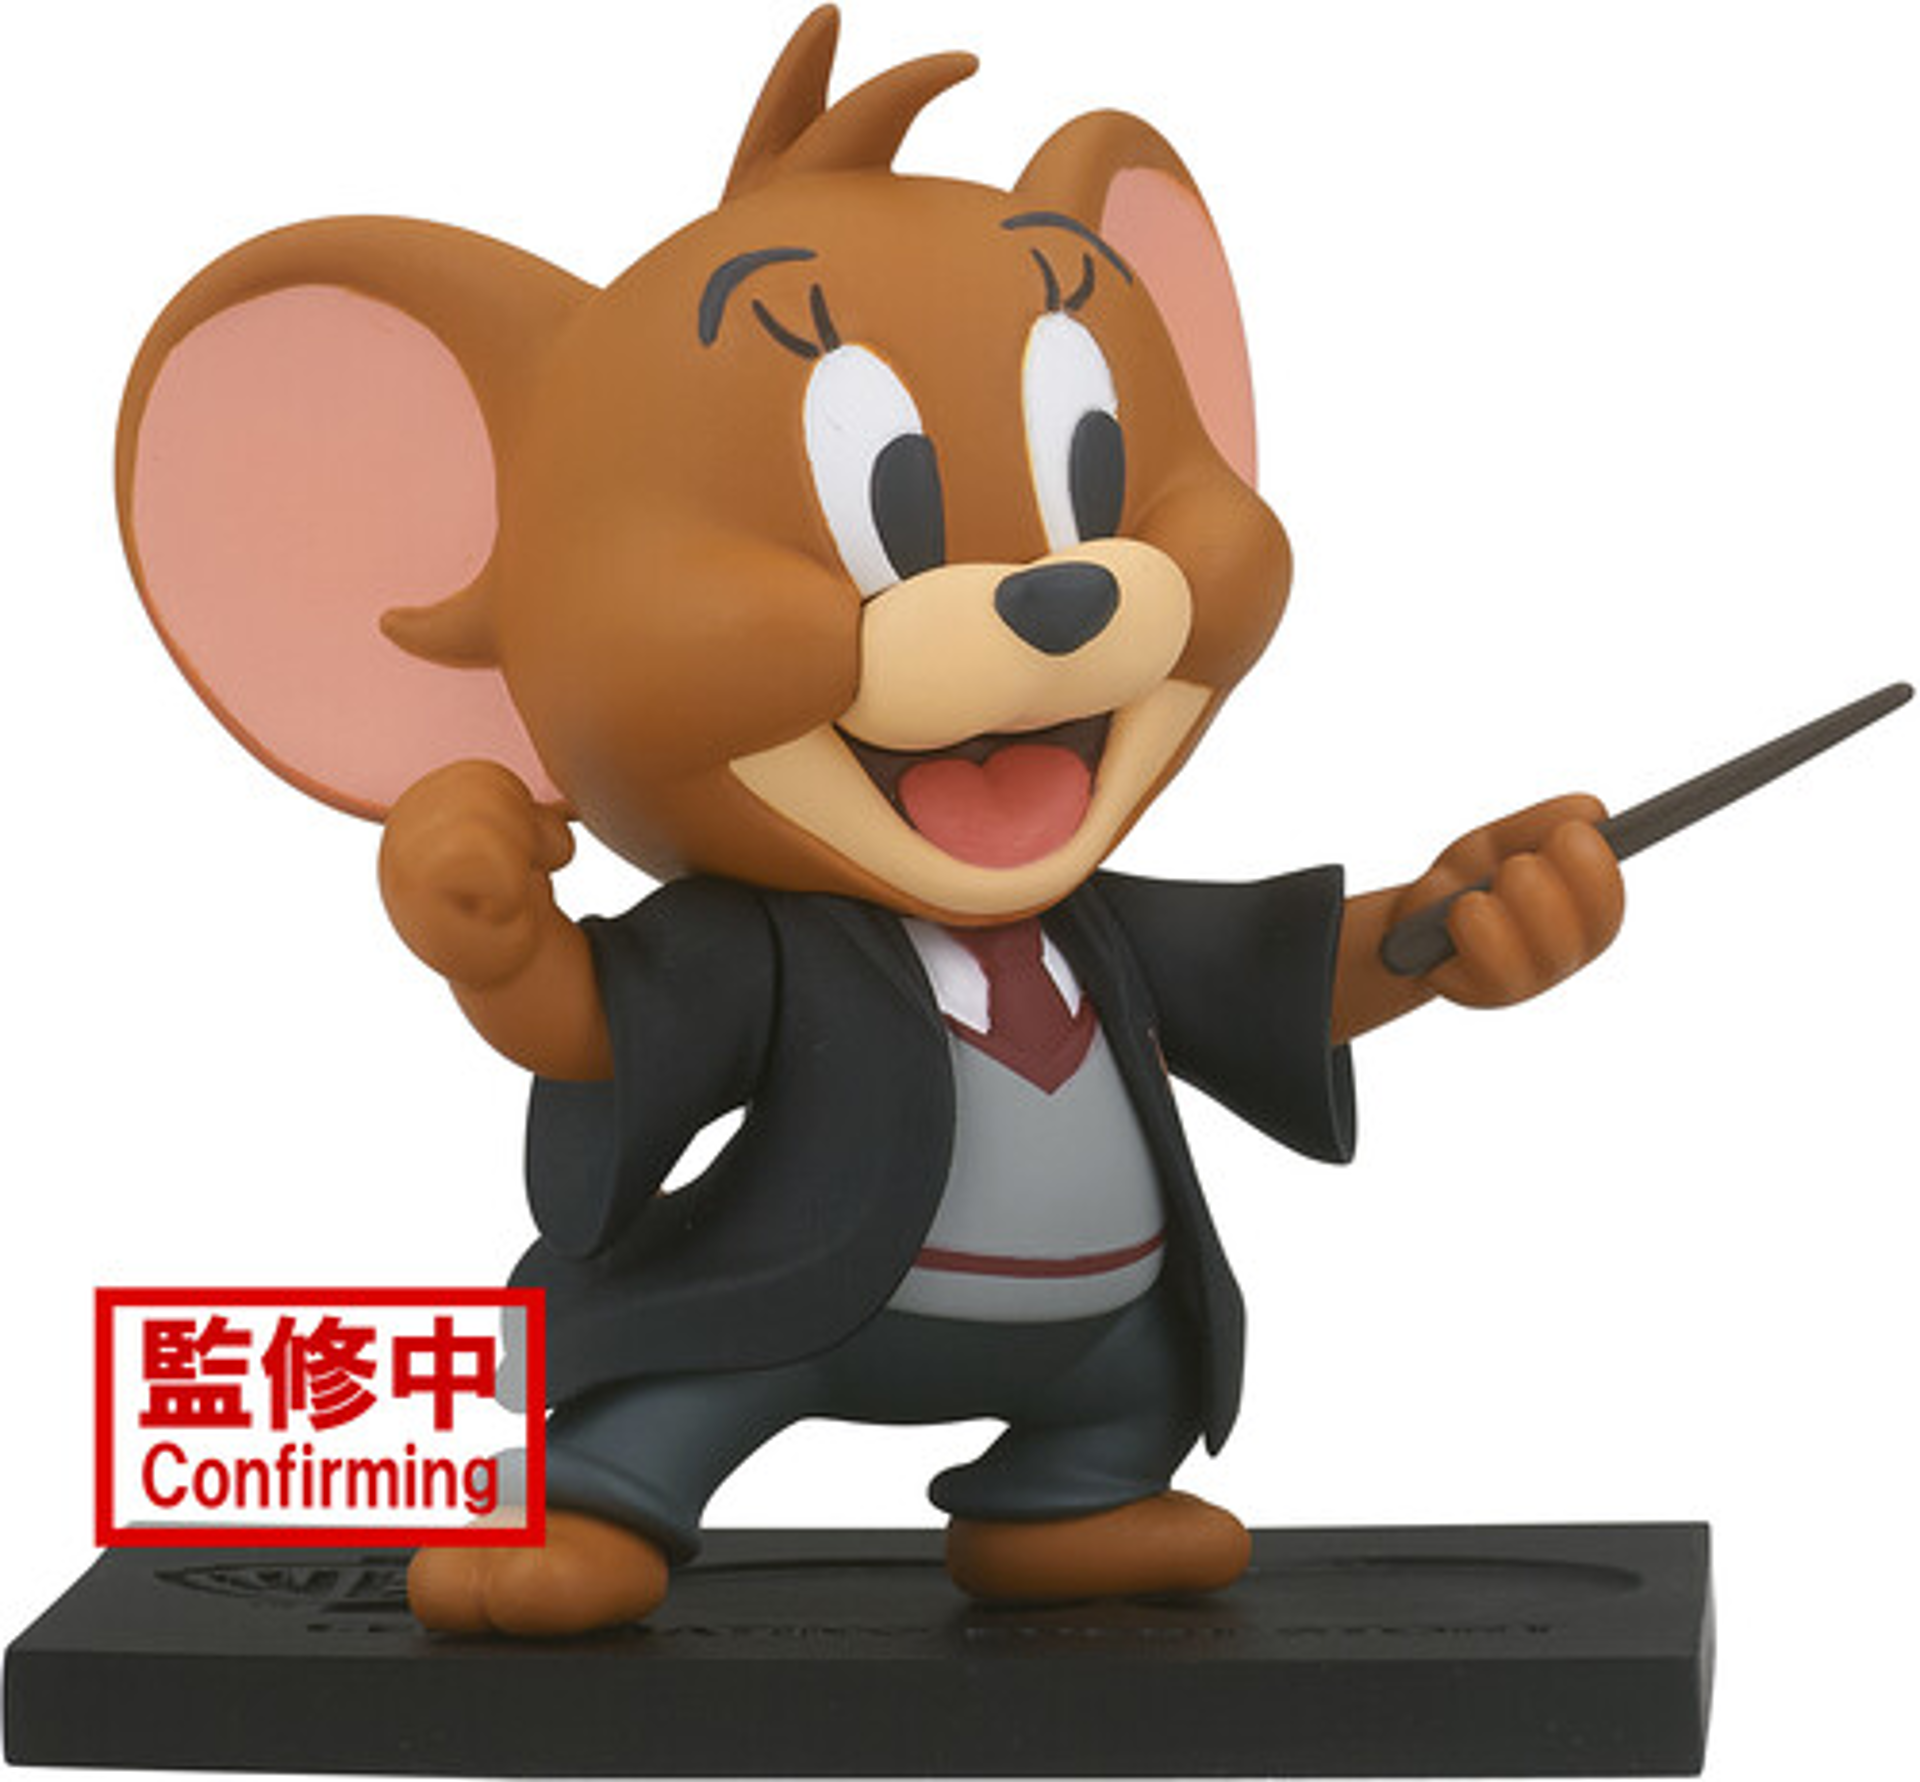 Tom And Jerry - WB 100th Anniversary - Gryffindor Jerry Statue 6cm